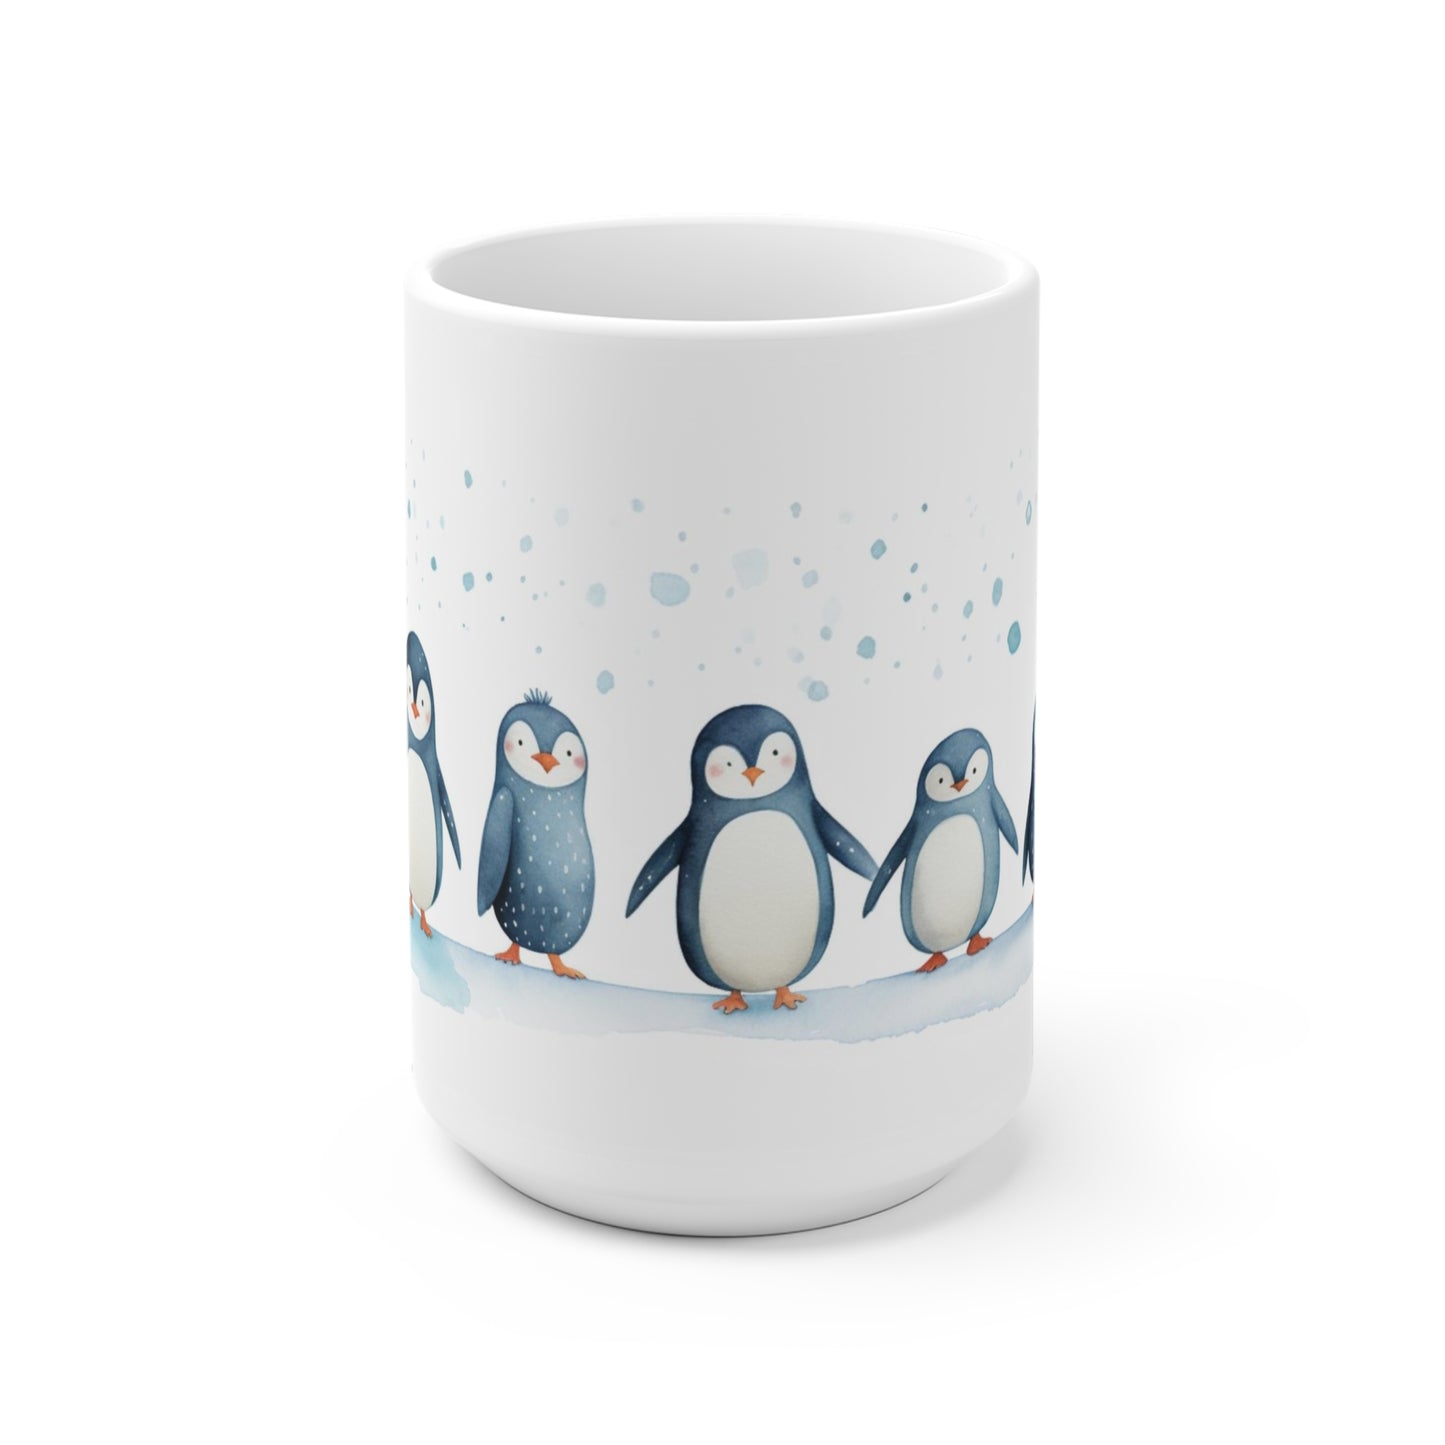 Cute Penguins Coffee Mug, Watercolor Art Ceramic Cup Tea Hot Chocolate Lover Unique Microwave Safe Novelty Cool Gift Starcove Fashion